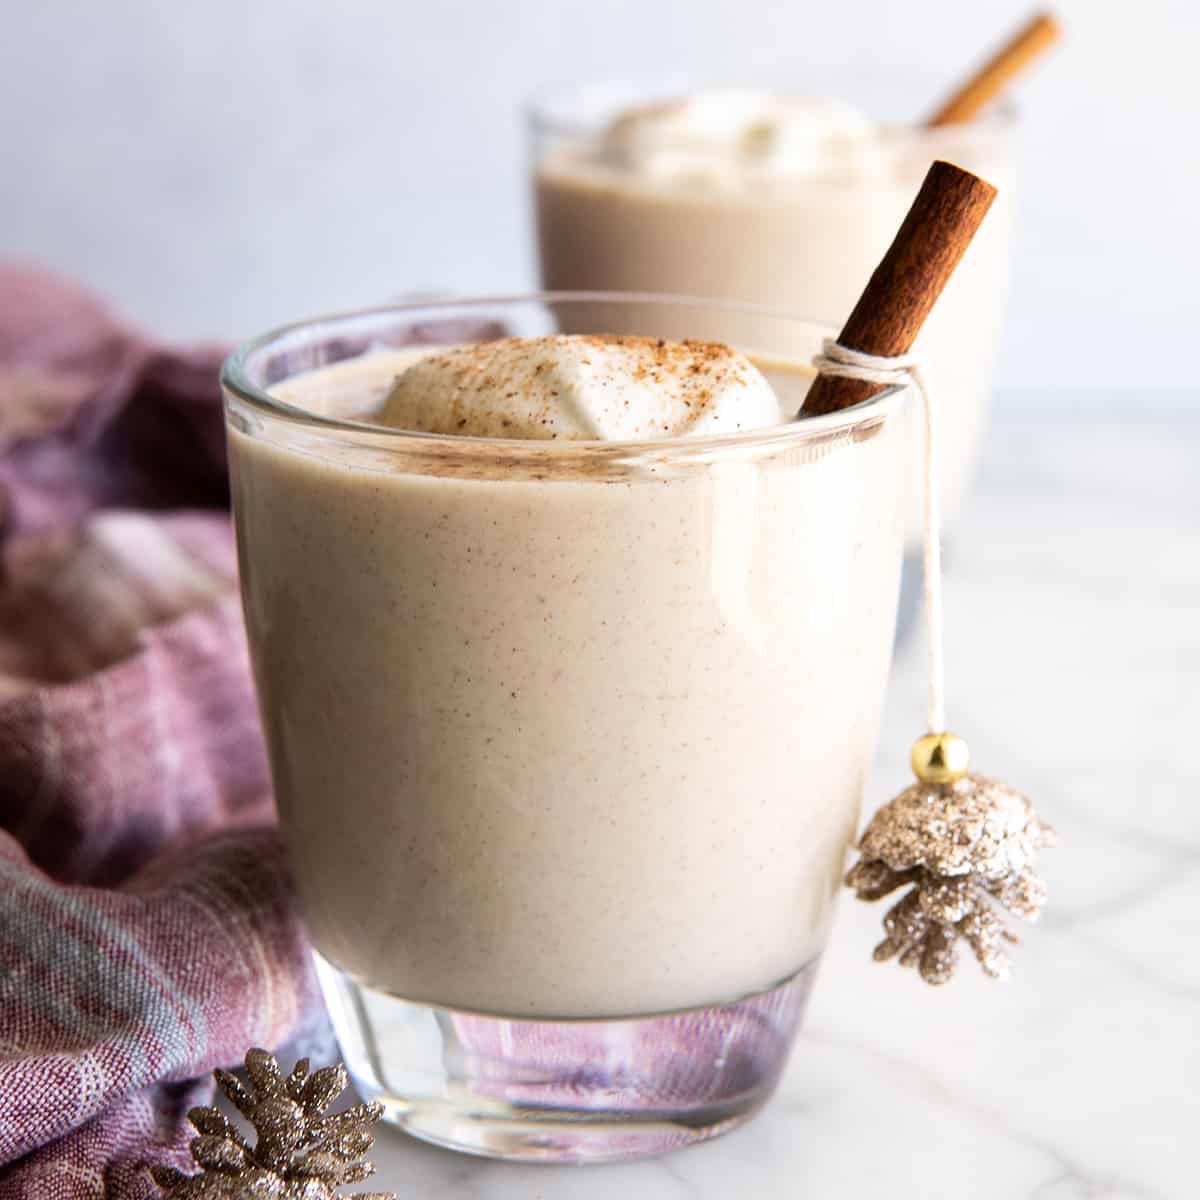 two glasses of Homemade Eggnog with whipped cream and ground nutmeg on top and a cinnamon stick inside.